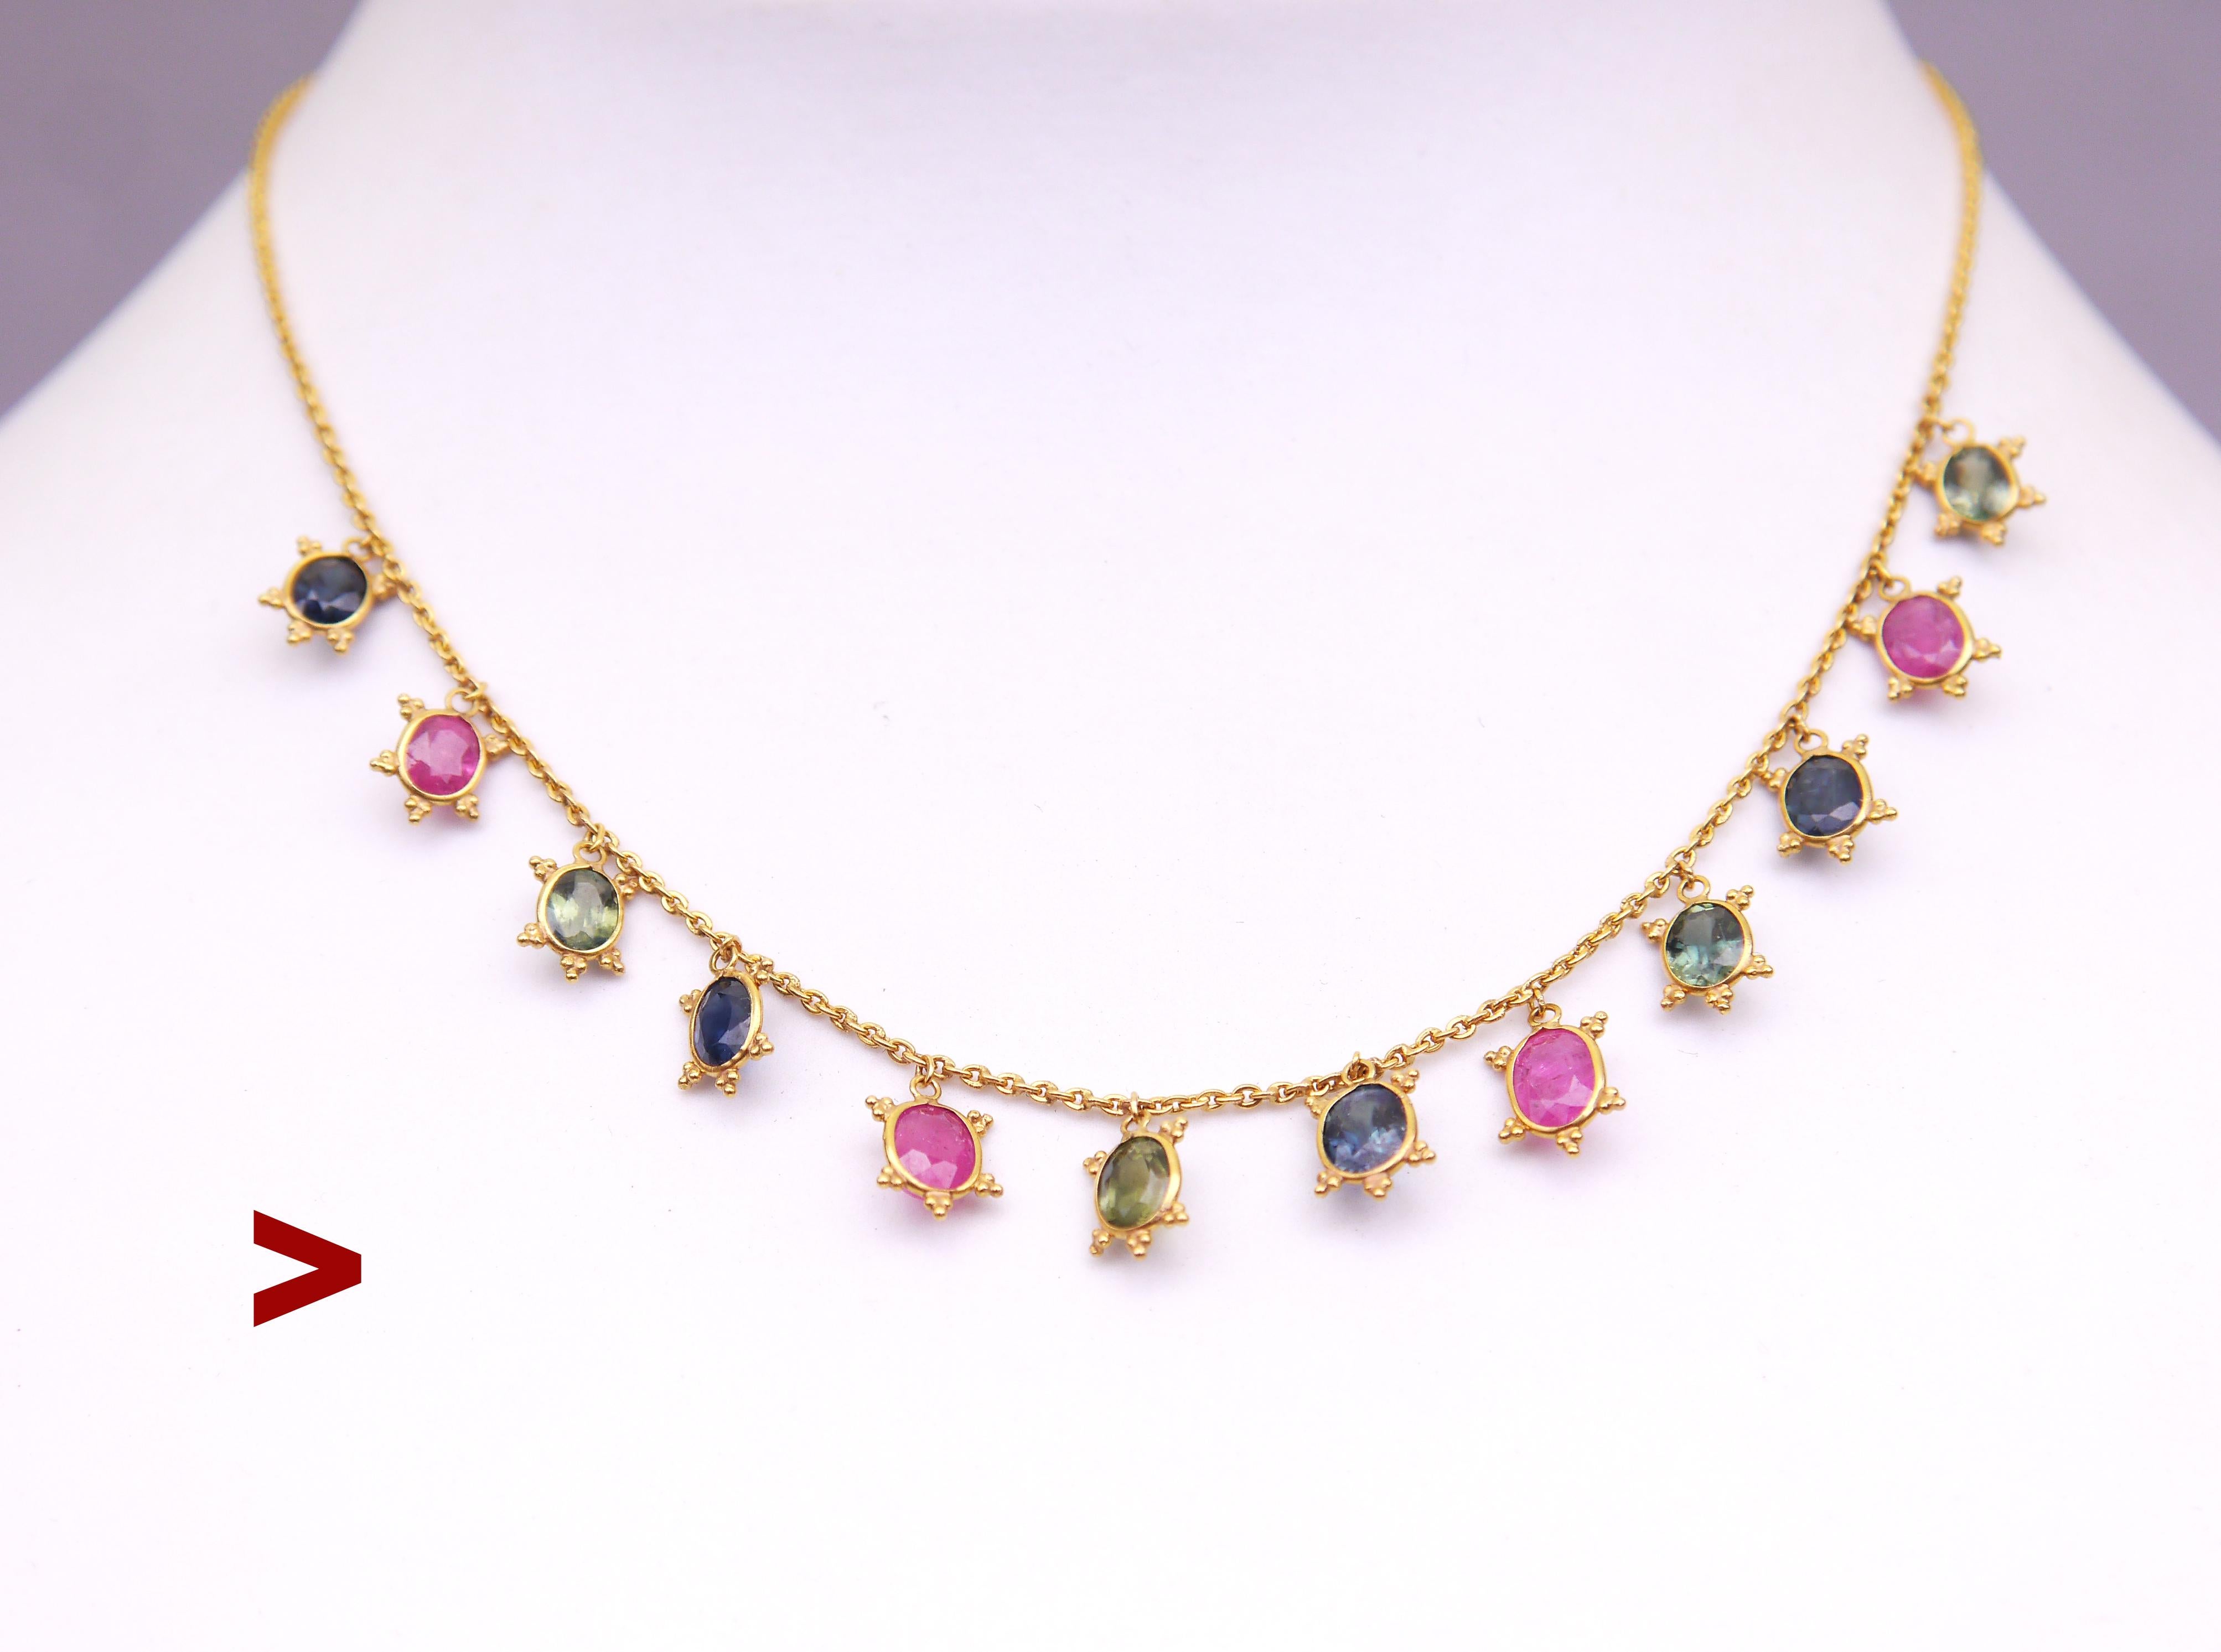 Necklace in solid 21K Gold featuring 12 Green and Blue Sapphires mixed with pinky-red rubies.

All stones are oval-cut untreated naturals with visible flaws and inclusions/.

All stones of slightly different dimensions:

Average measurements 5.75 mm